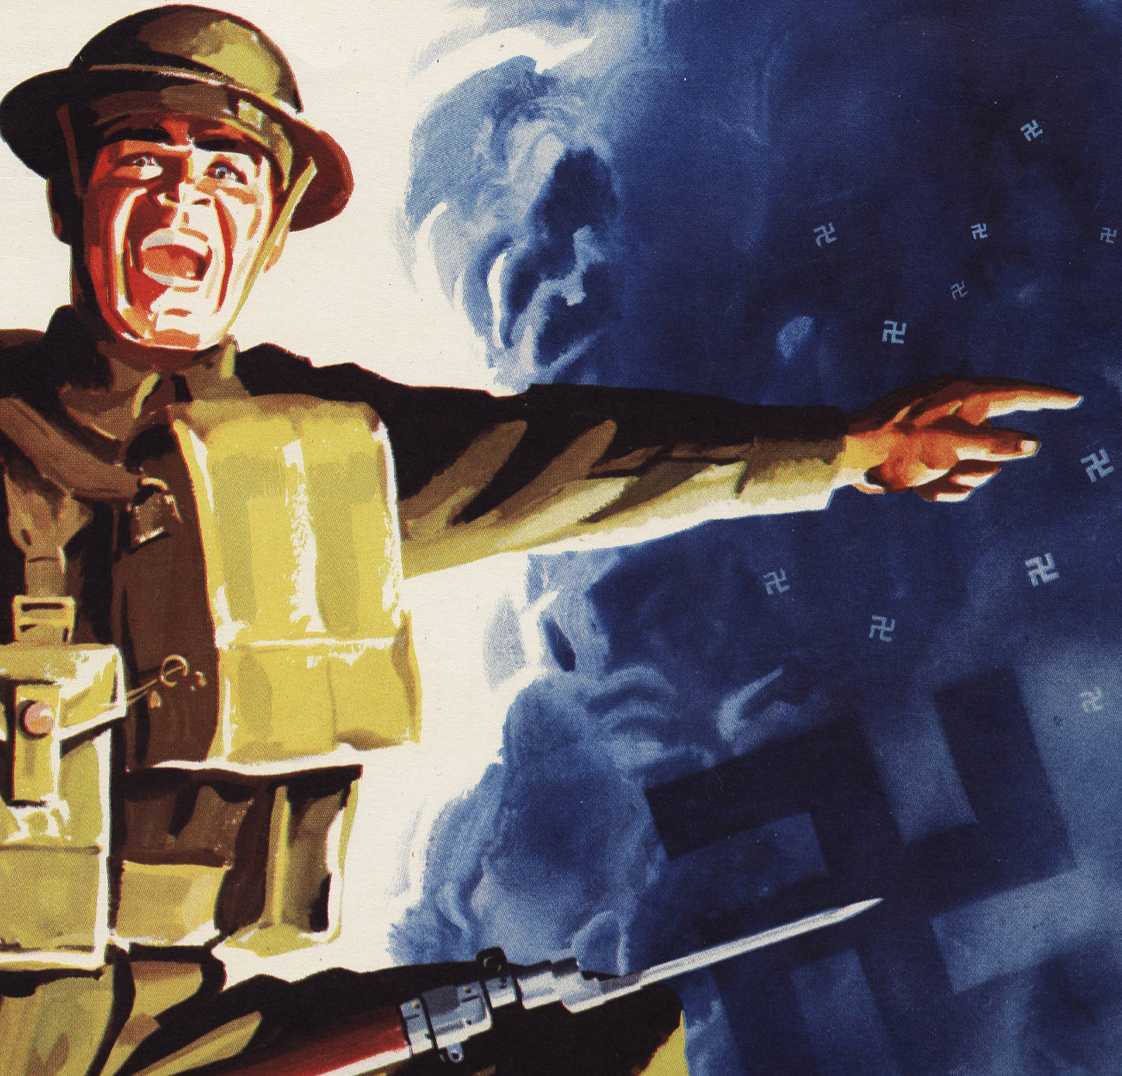 Illustrated poster, colour. A Canadian soldier, gun in hand, stands on a globe, feet on Canada and the United Kingdom, where a Union Jack flies and large guns fire upwards. He is yelling, pointing towards Europe. Dark clouds and swastikas are in the sky.